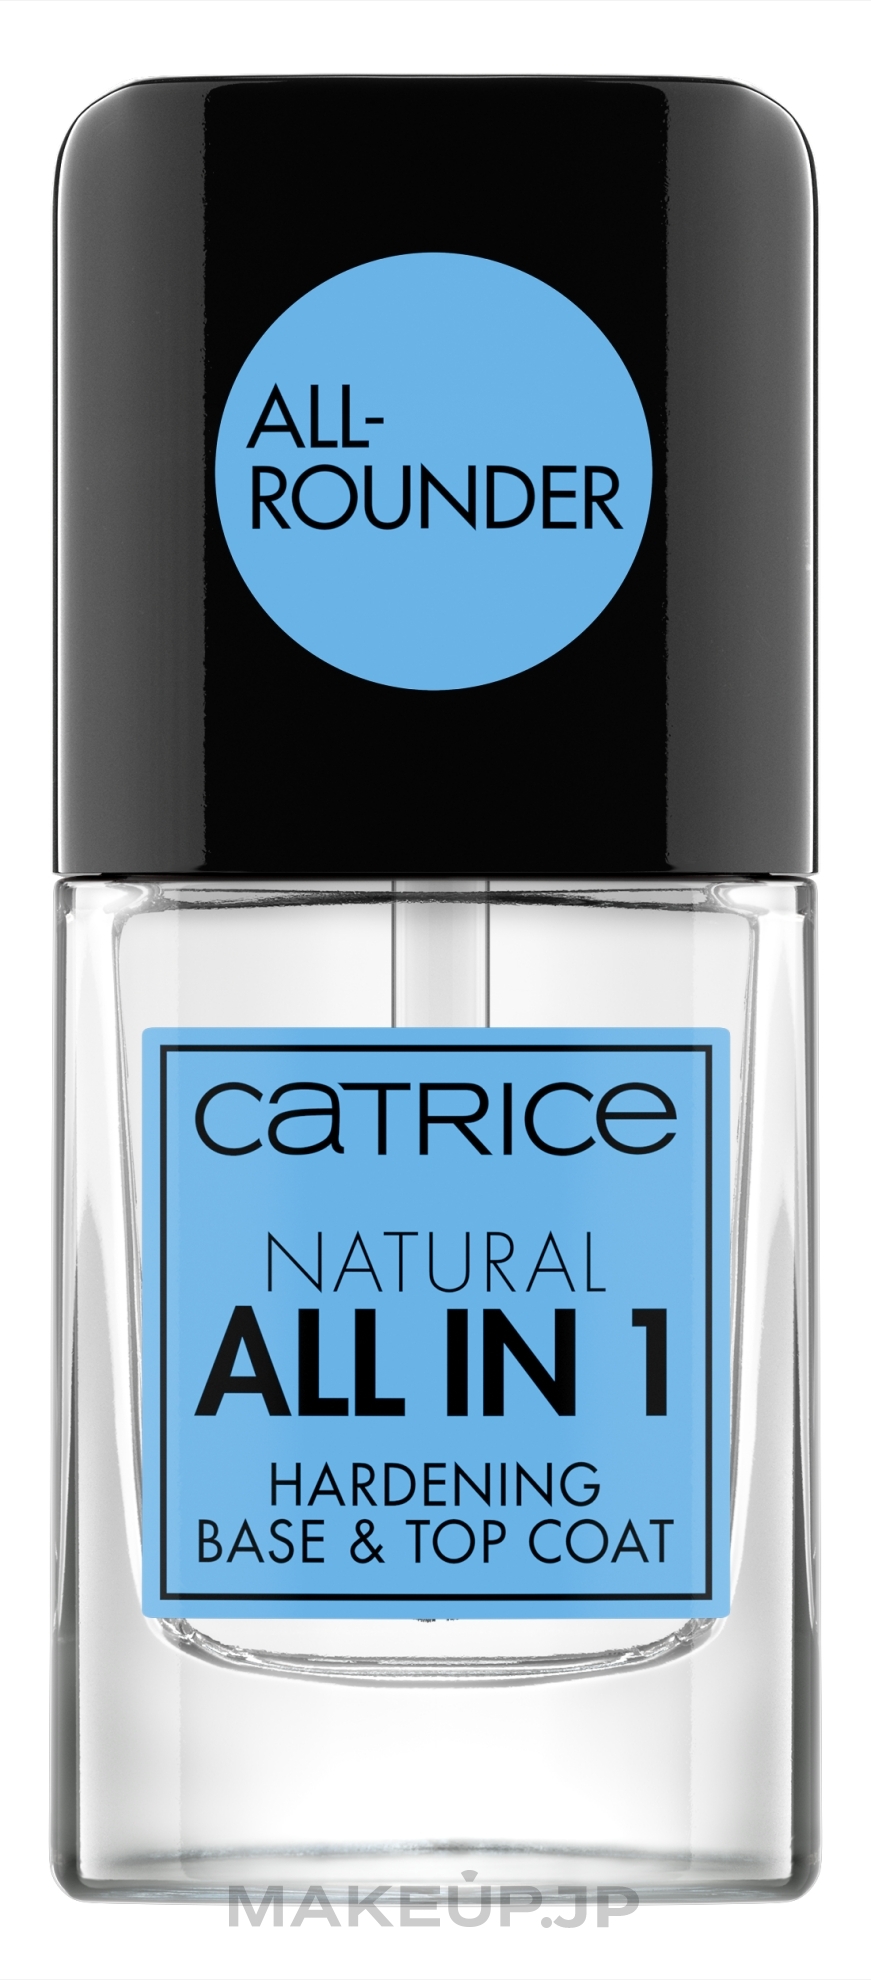 2-in-1 Base & Top Coat - Catrice Natural All in 1 Hardening Base &Top Coat — photo 10.5 ml